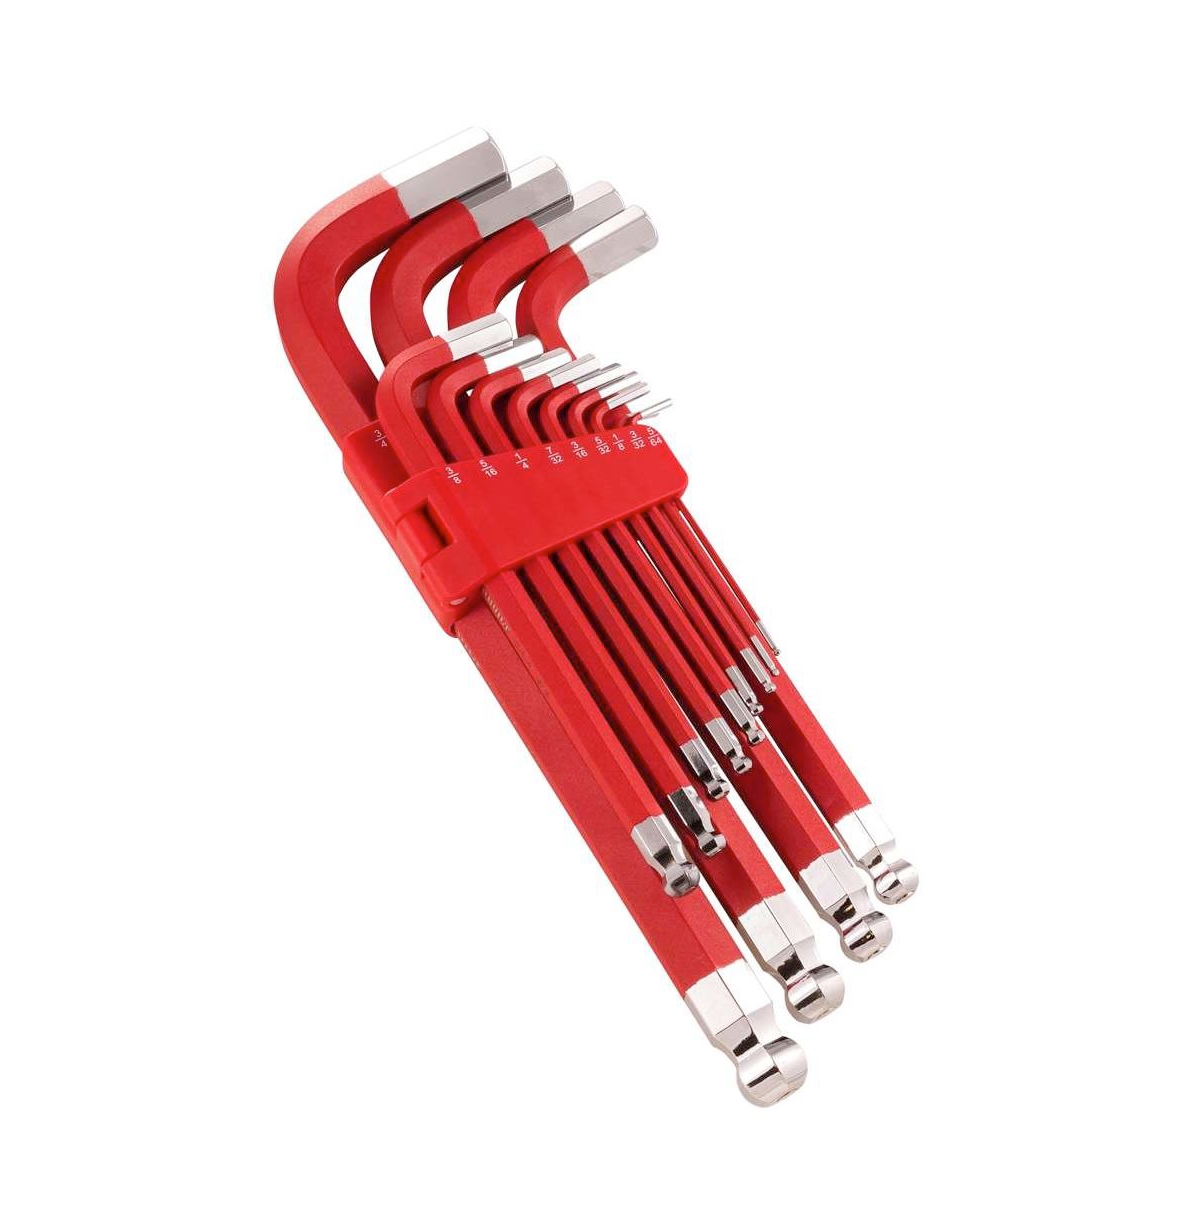 13 Piece Sae Long Arm Magnetic Hex Key Wrench Set Red - Red